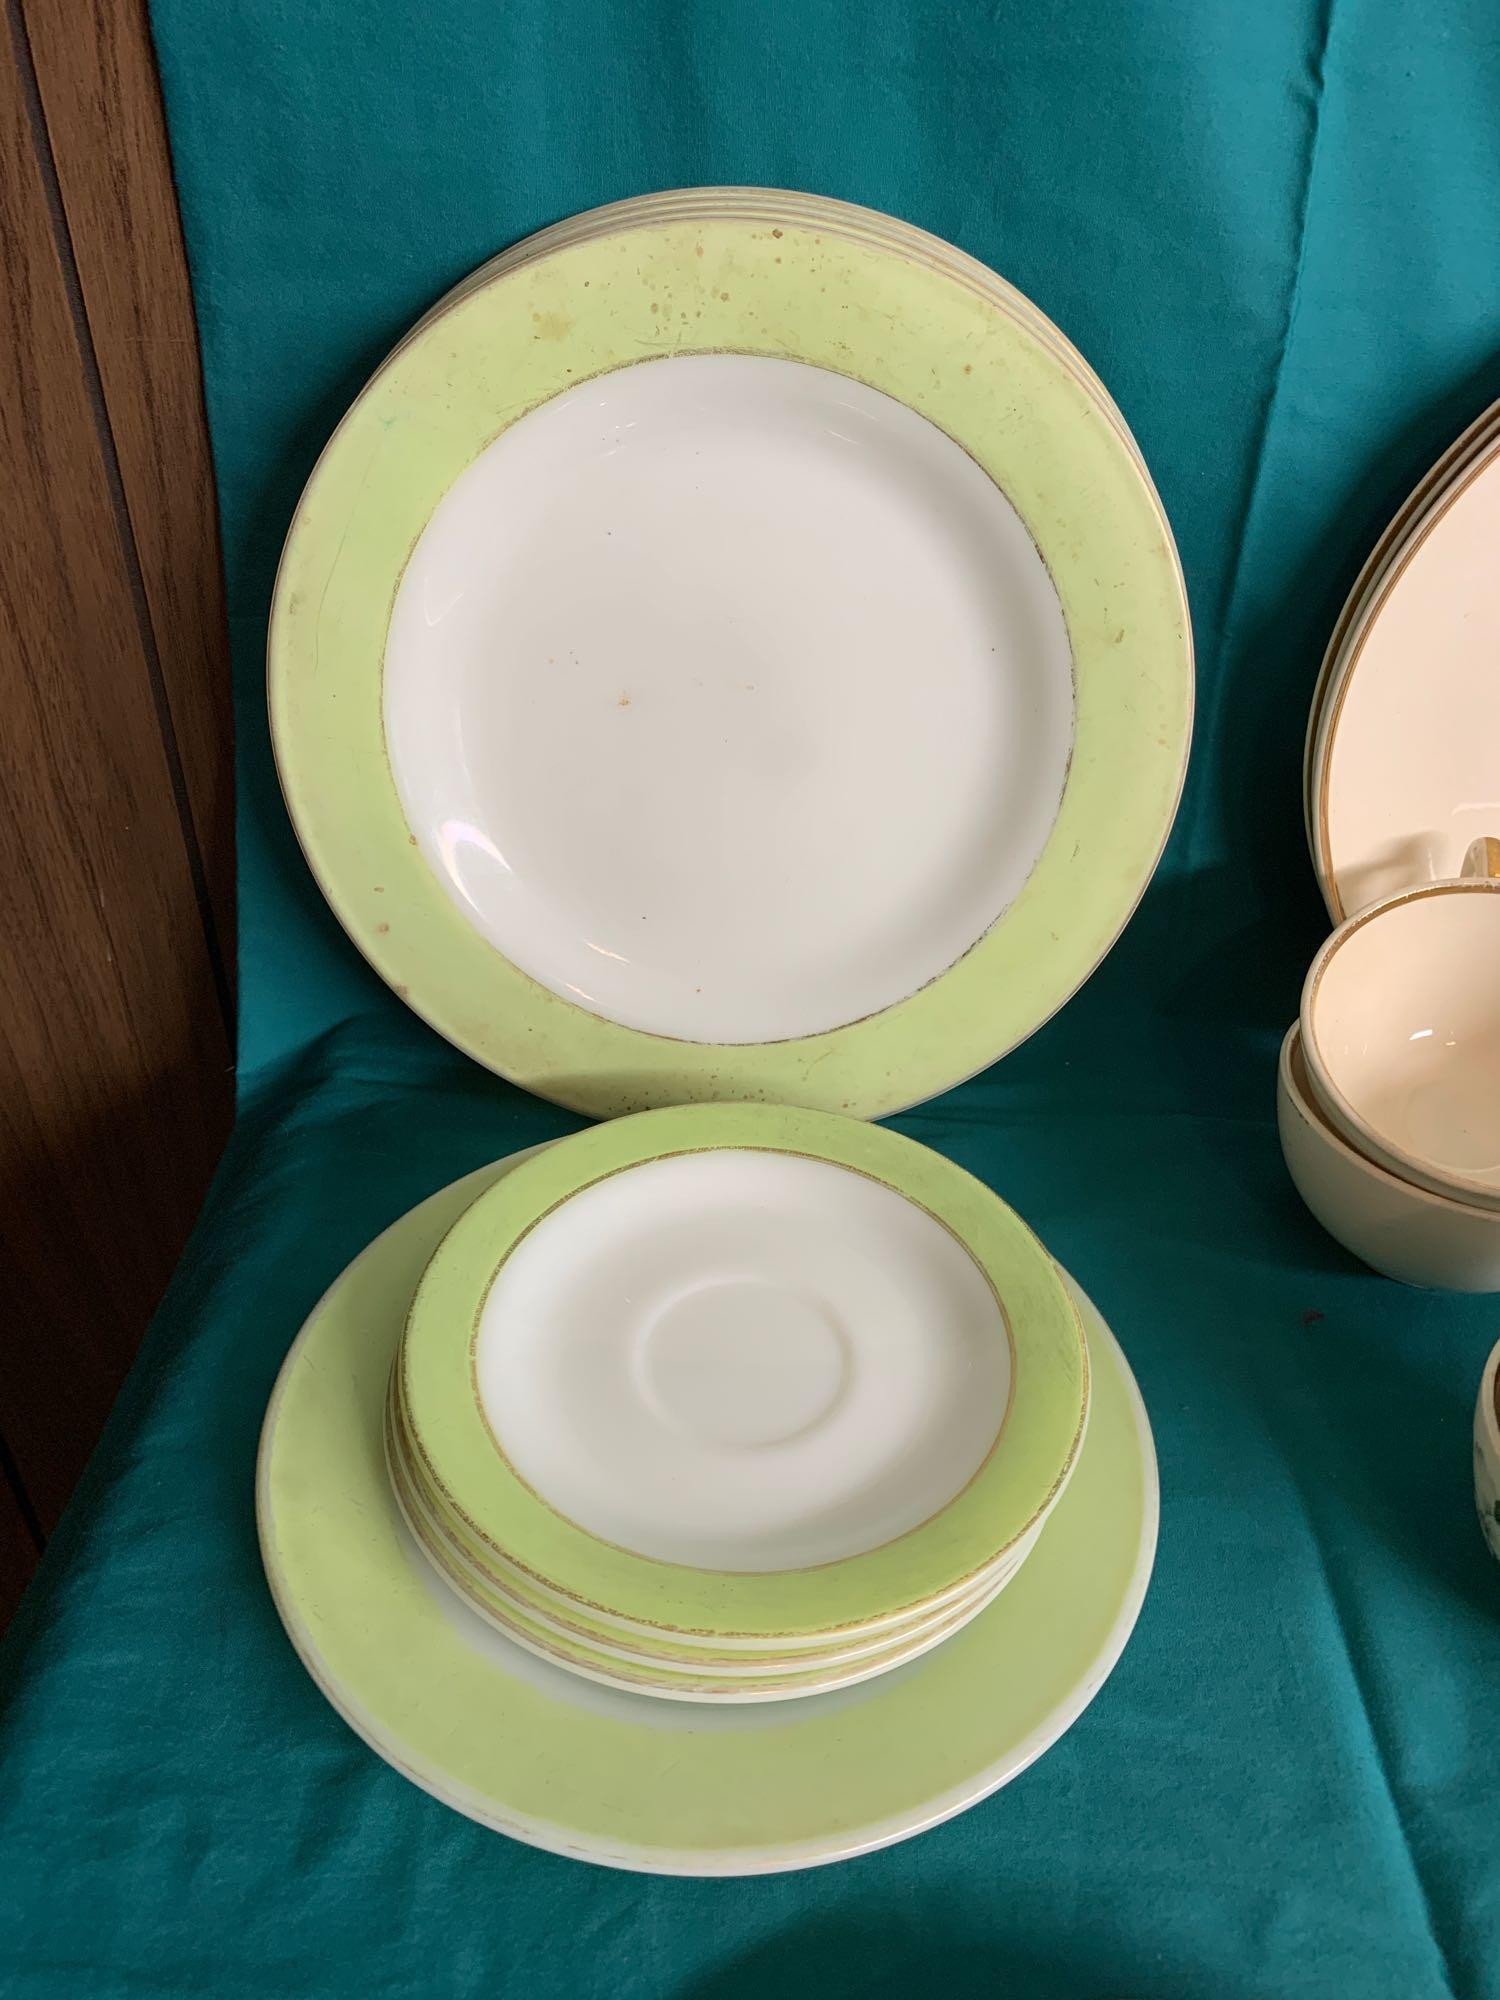 Sun_Valley MelMac Dishes, Prolon Dinnerware, & Pyrex Dishes